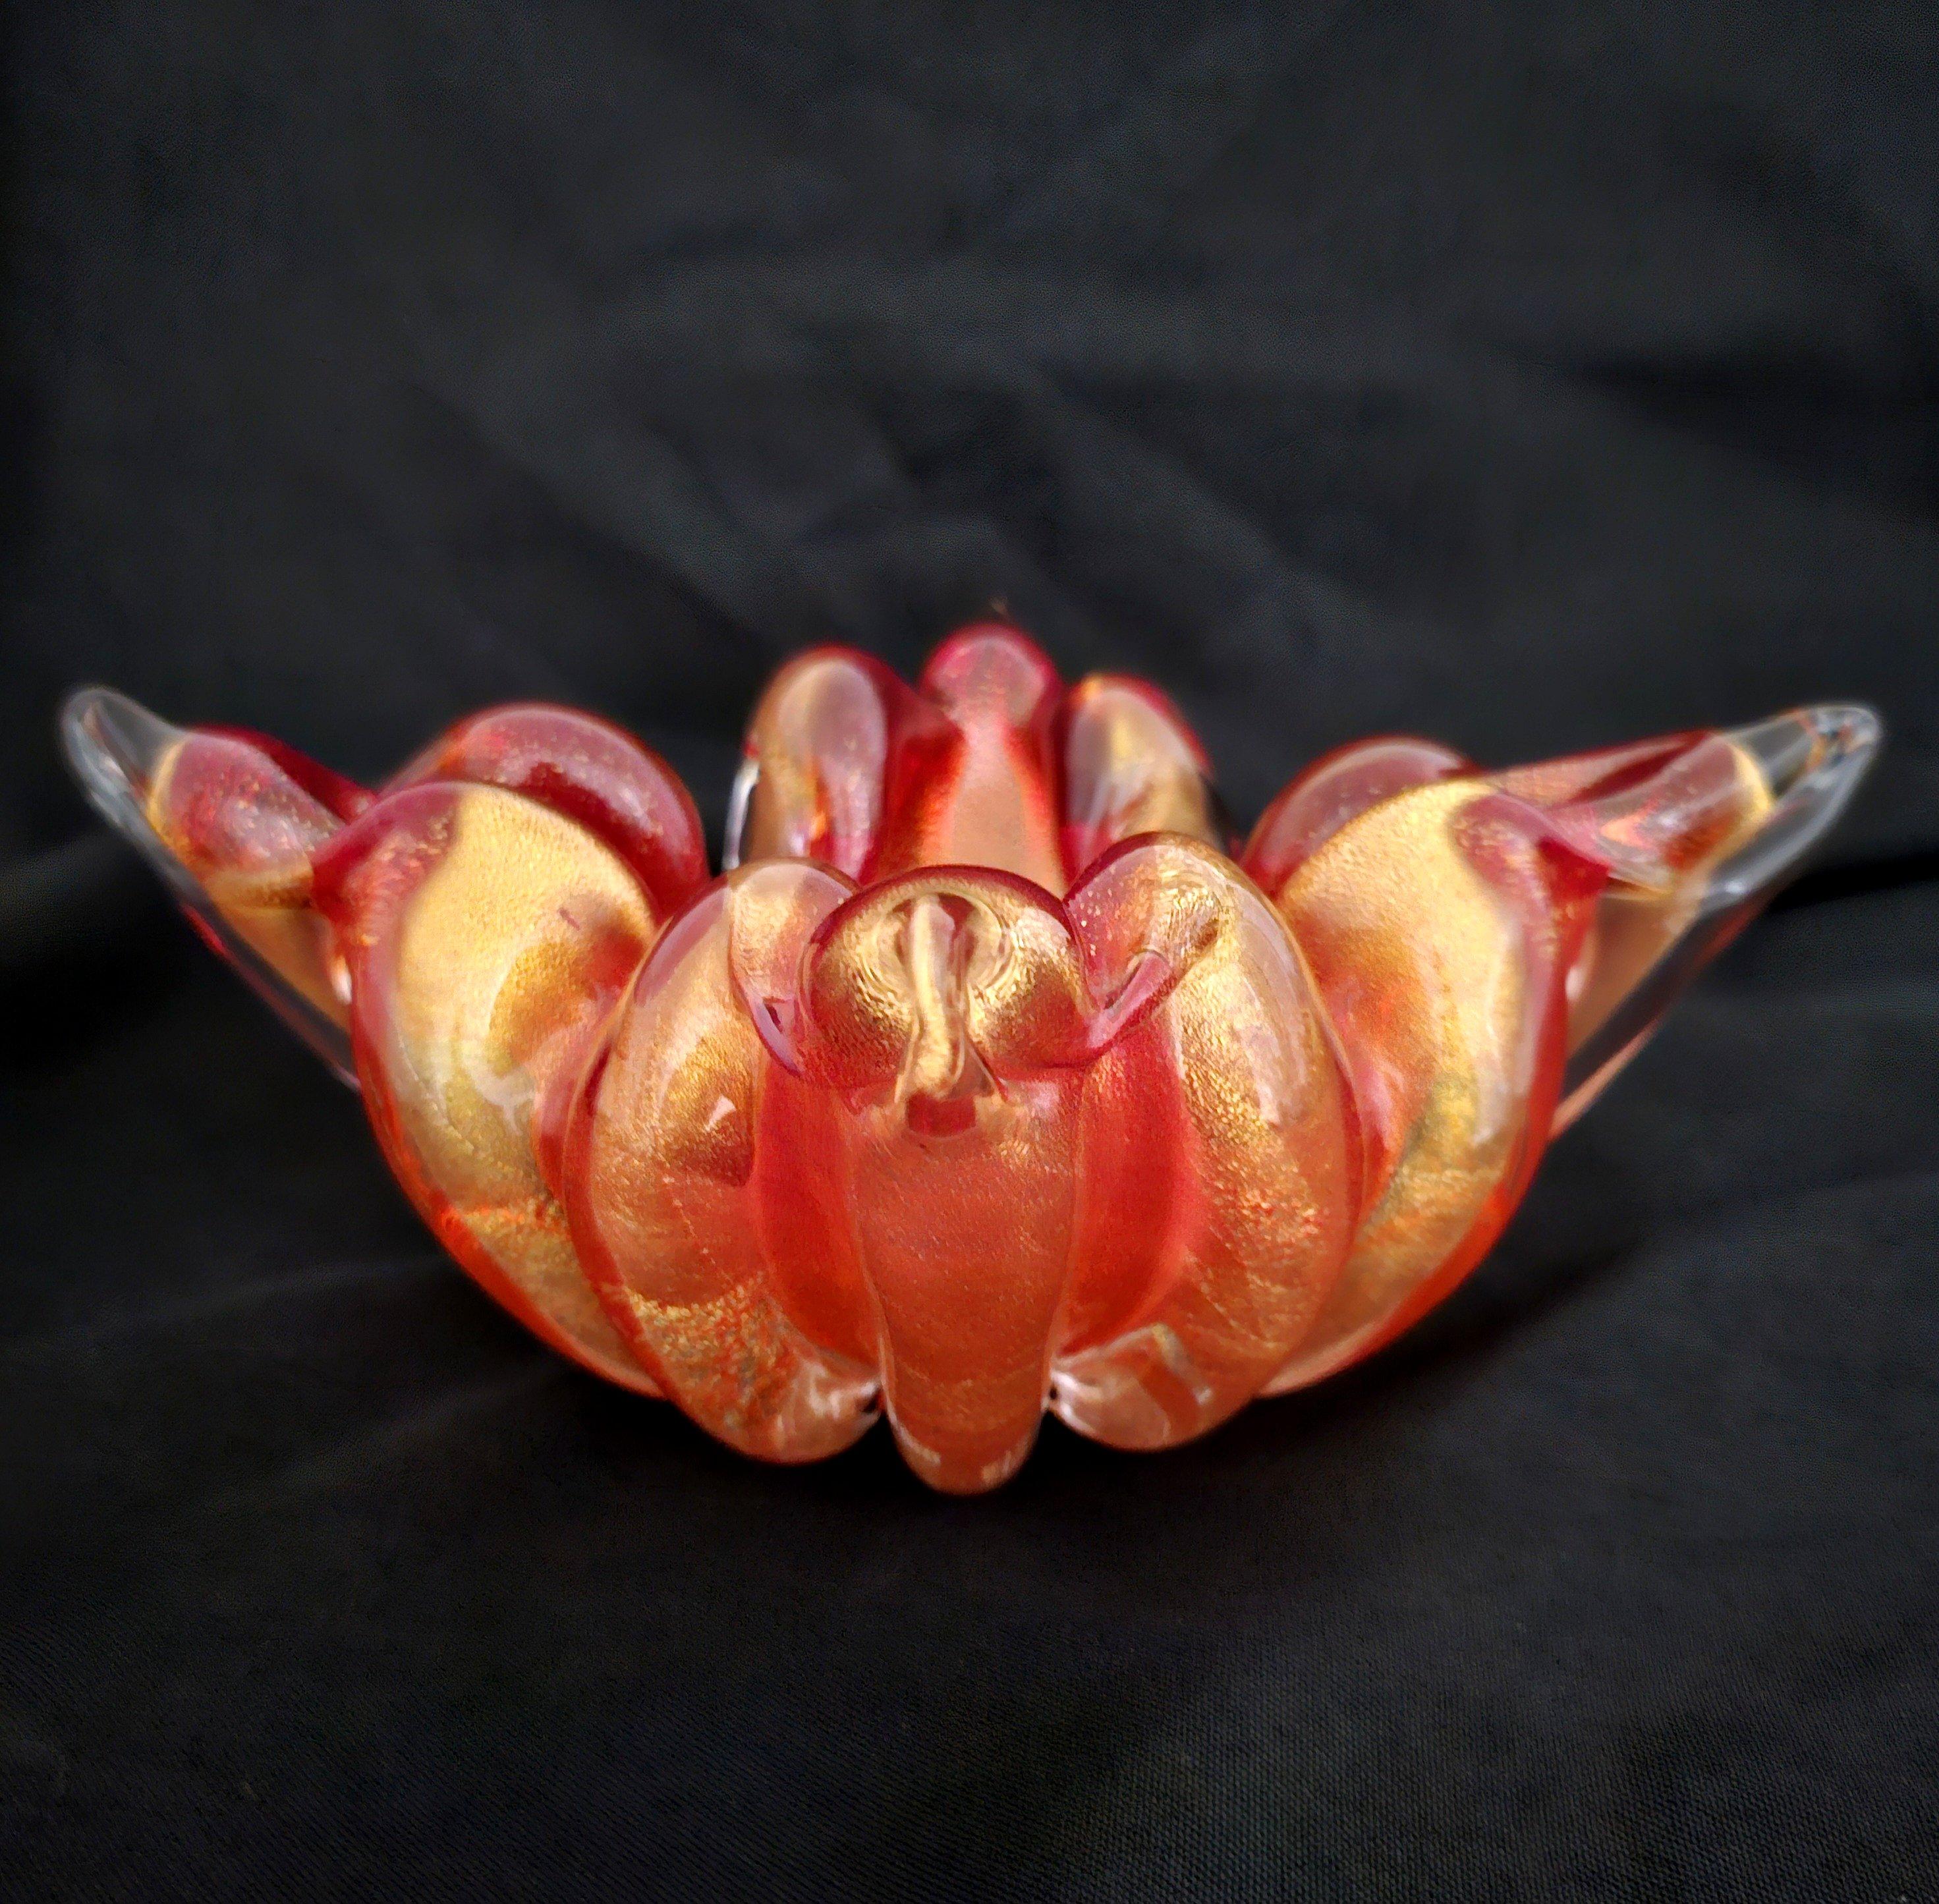 20th Century Murano Glass Ashtray, Red w/Gold Polveri / Gold Leaf, Barovier & Toso (assumed) For Sale